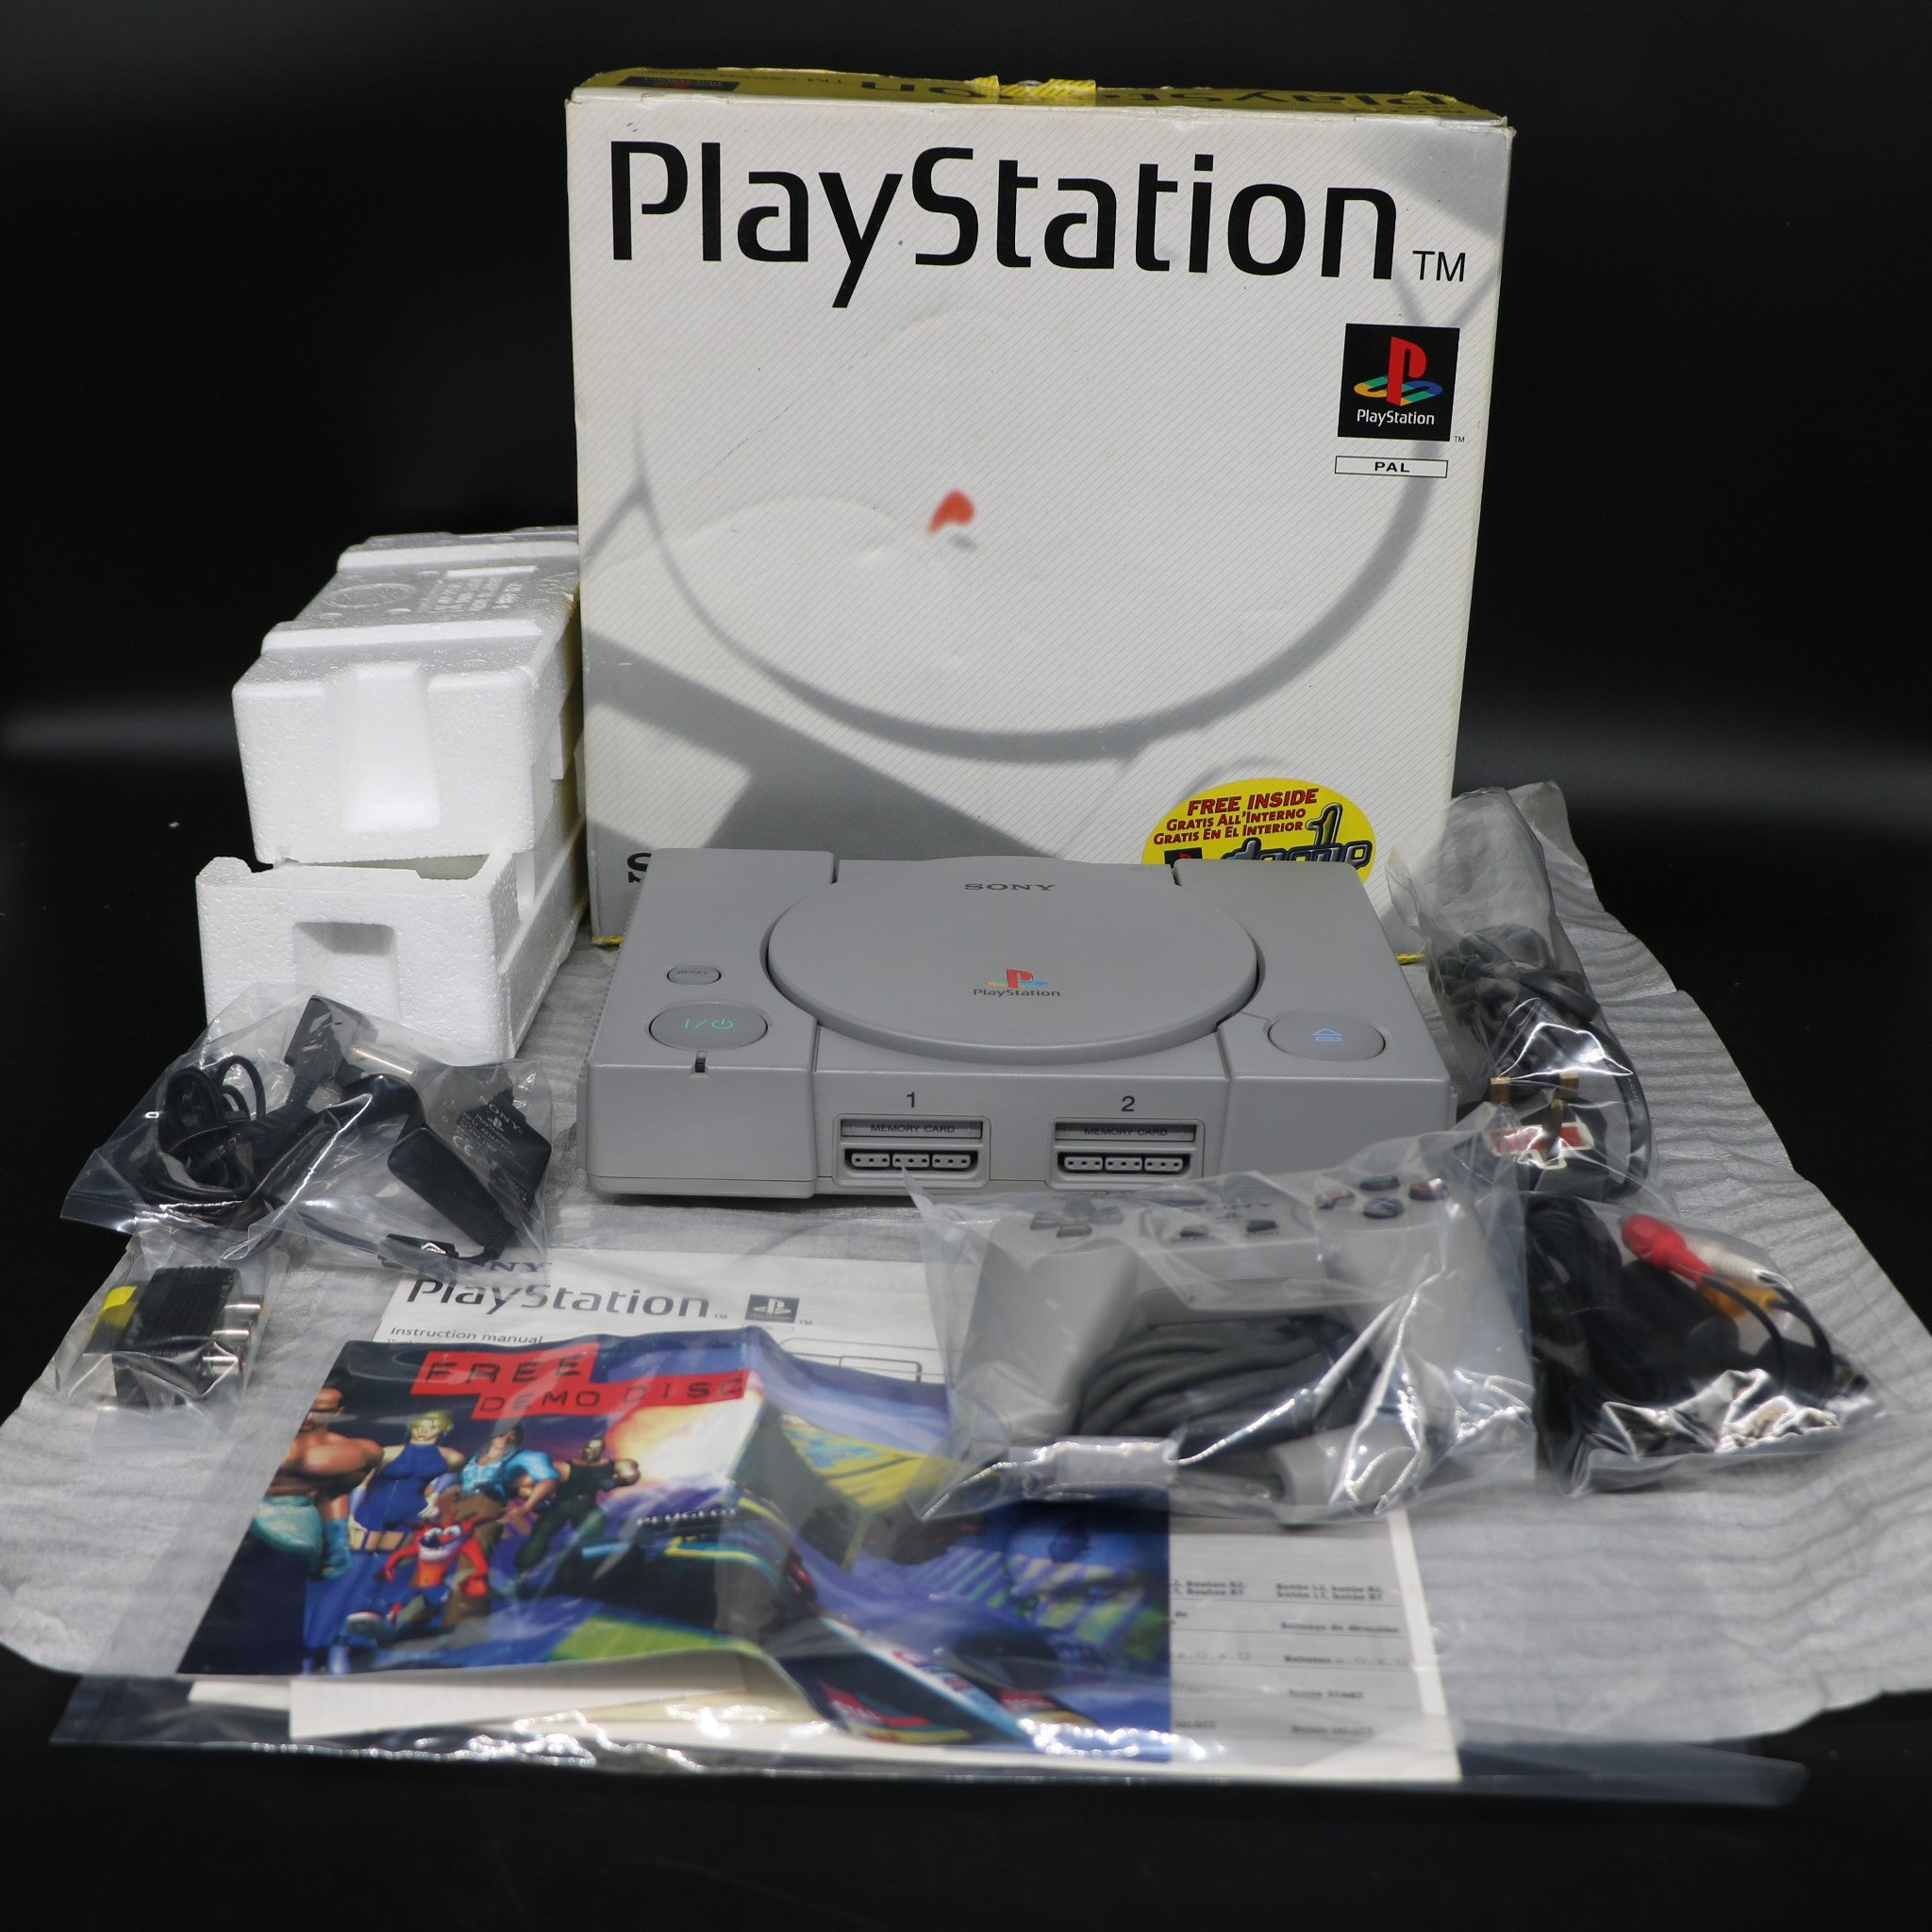 Fat Sony Playstation PS1 System Console SCPH-5502 | Boxed Very Nice Condition